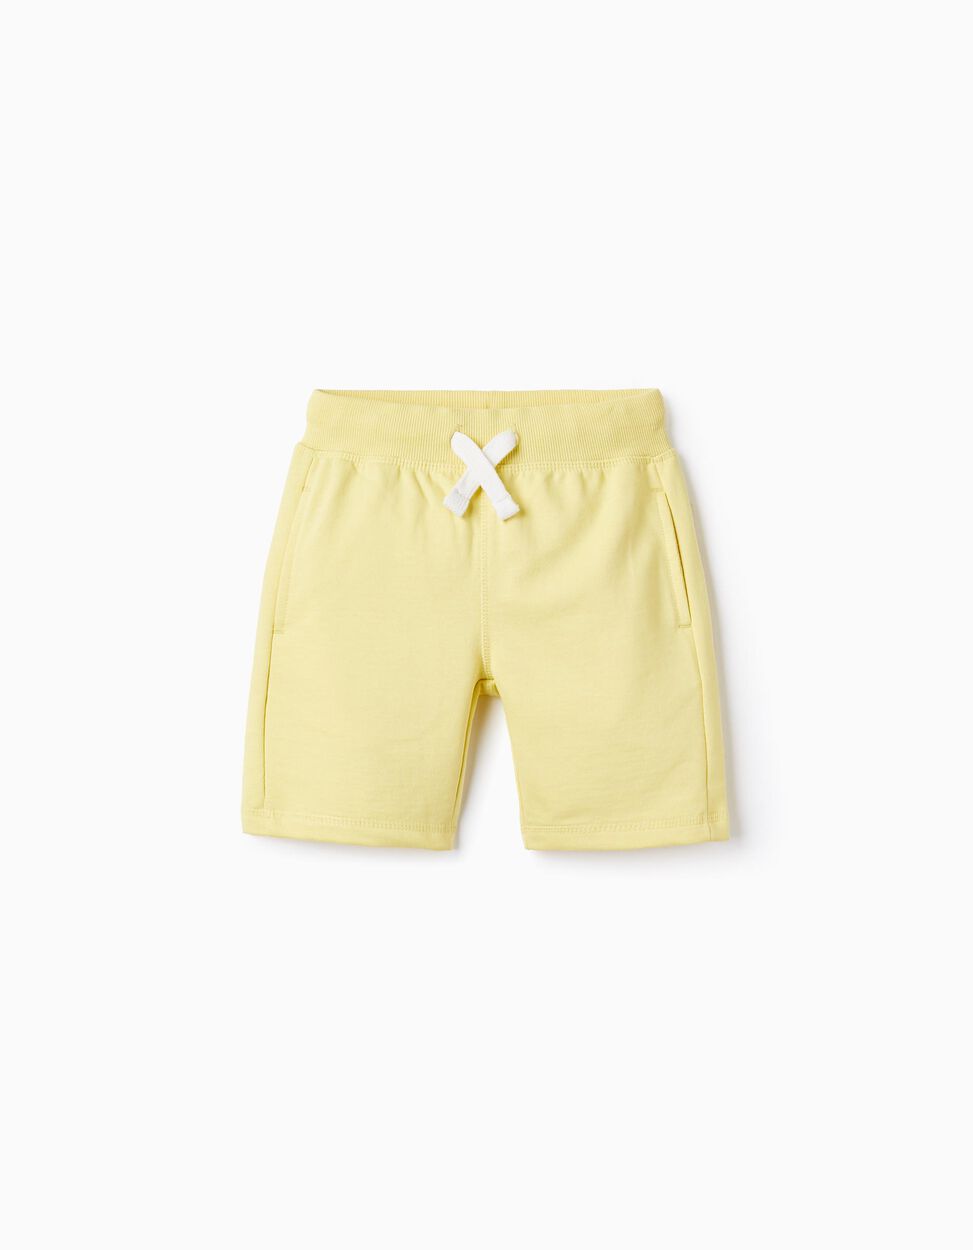 Buy Online Cotton Shorts for Boys, Yellow